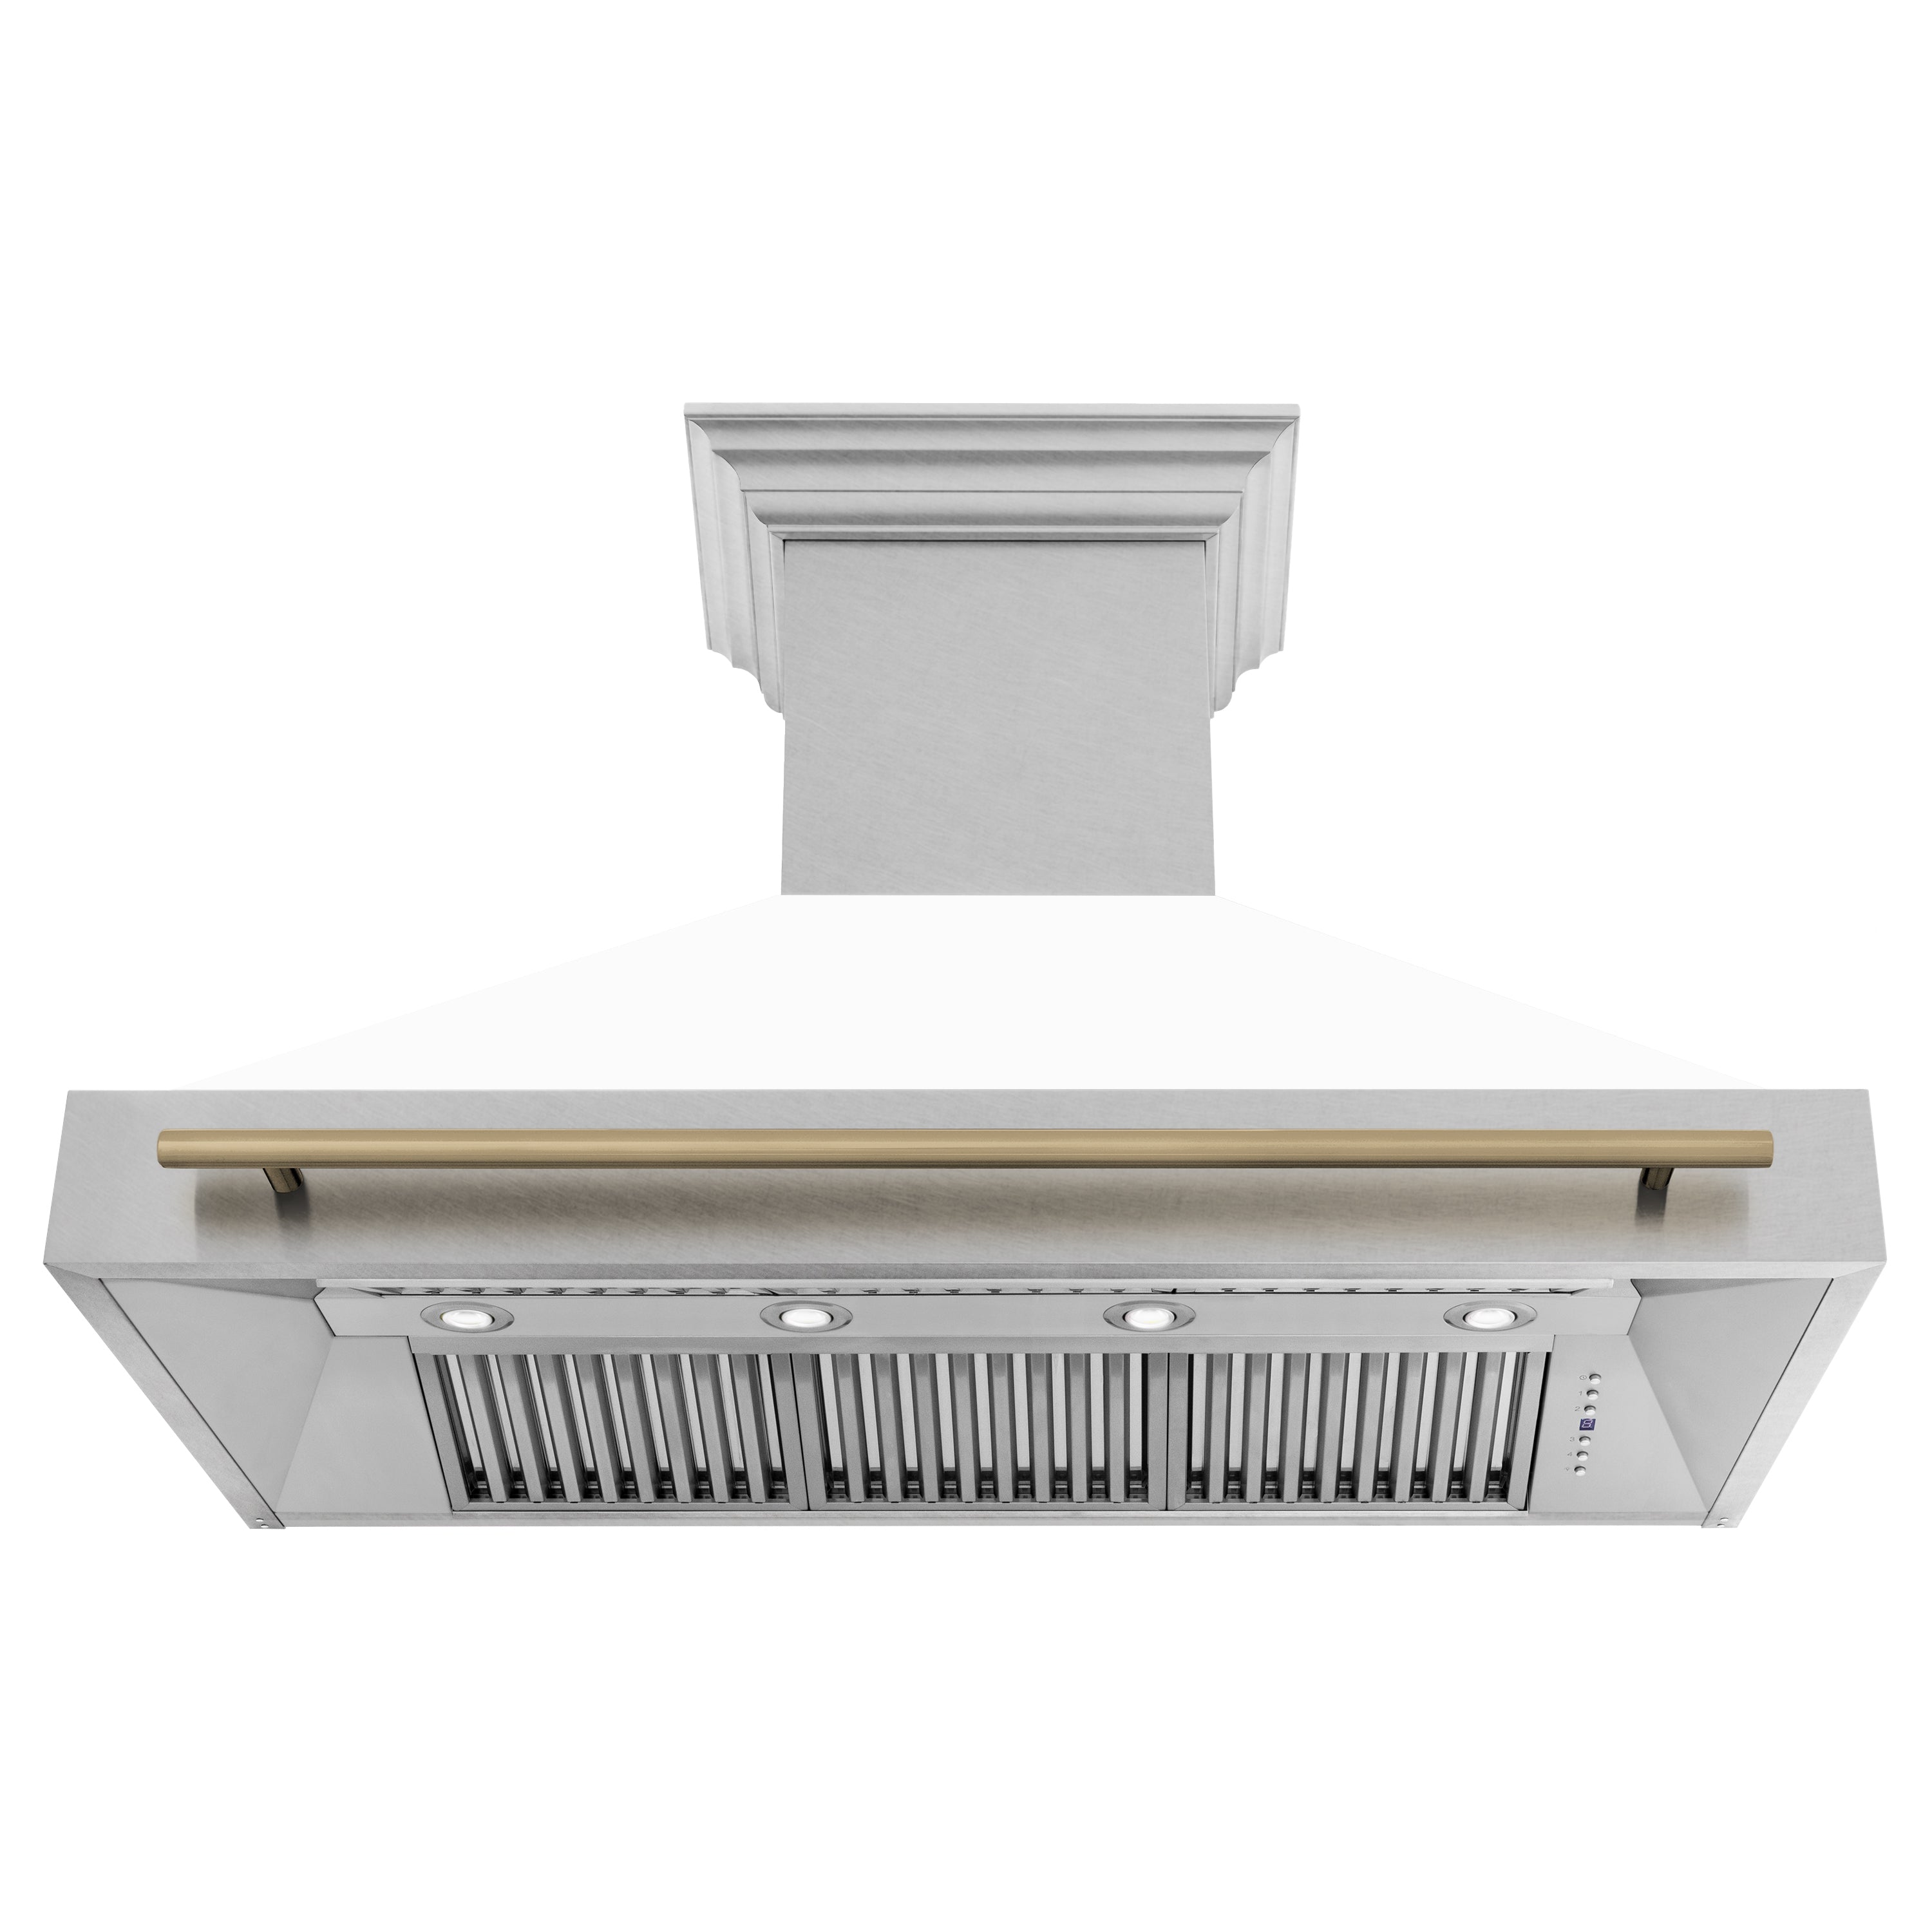 ZLINE 48" Autograph Edition Fingerprint Resistant Stainless Steel Range Hood with White Matte Shell and Champagne Bronze Handle (8654SNZ-WM48-CB)